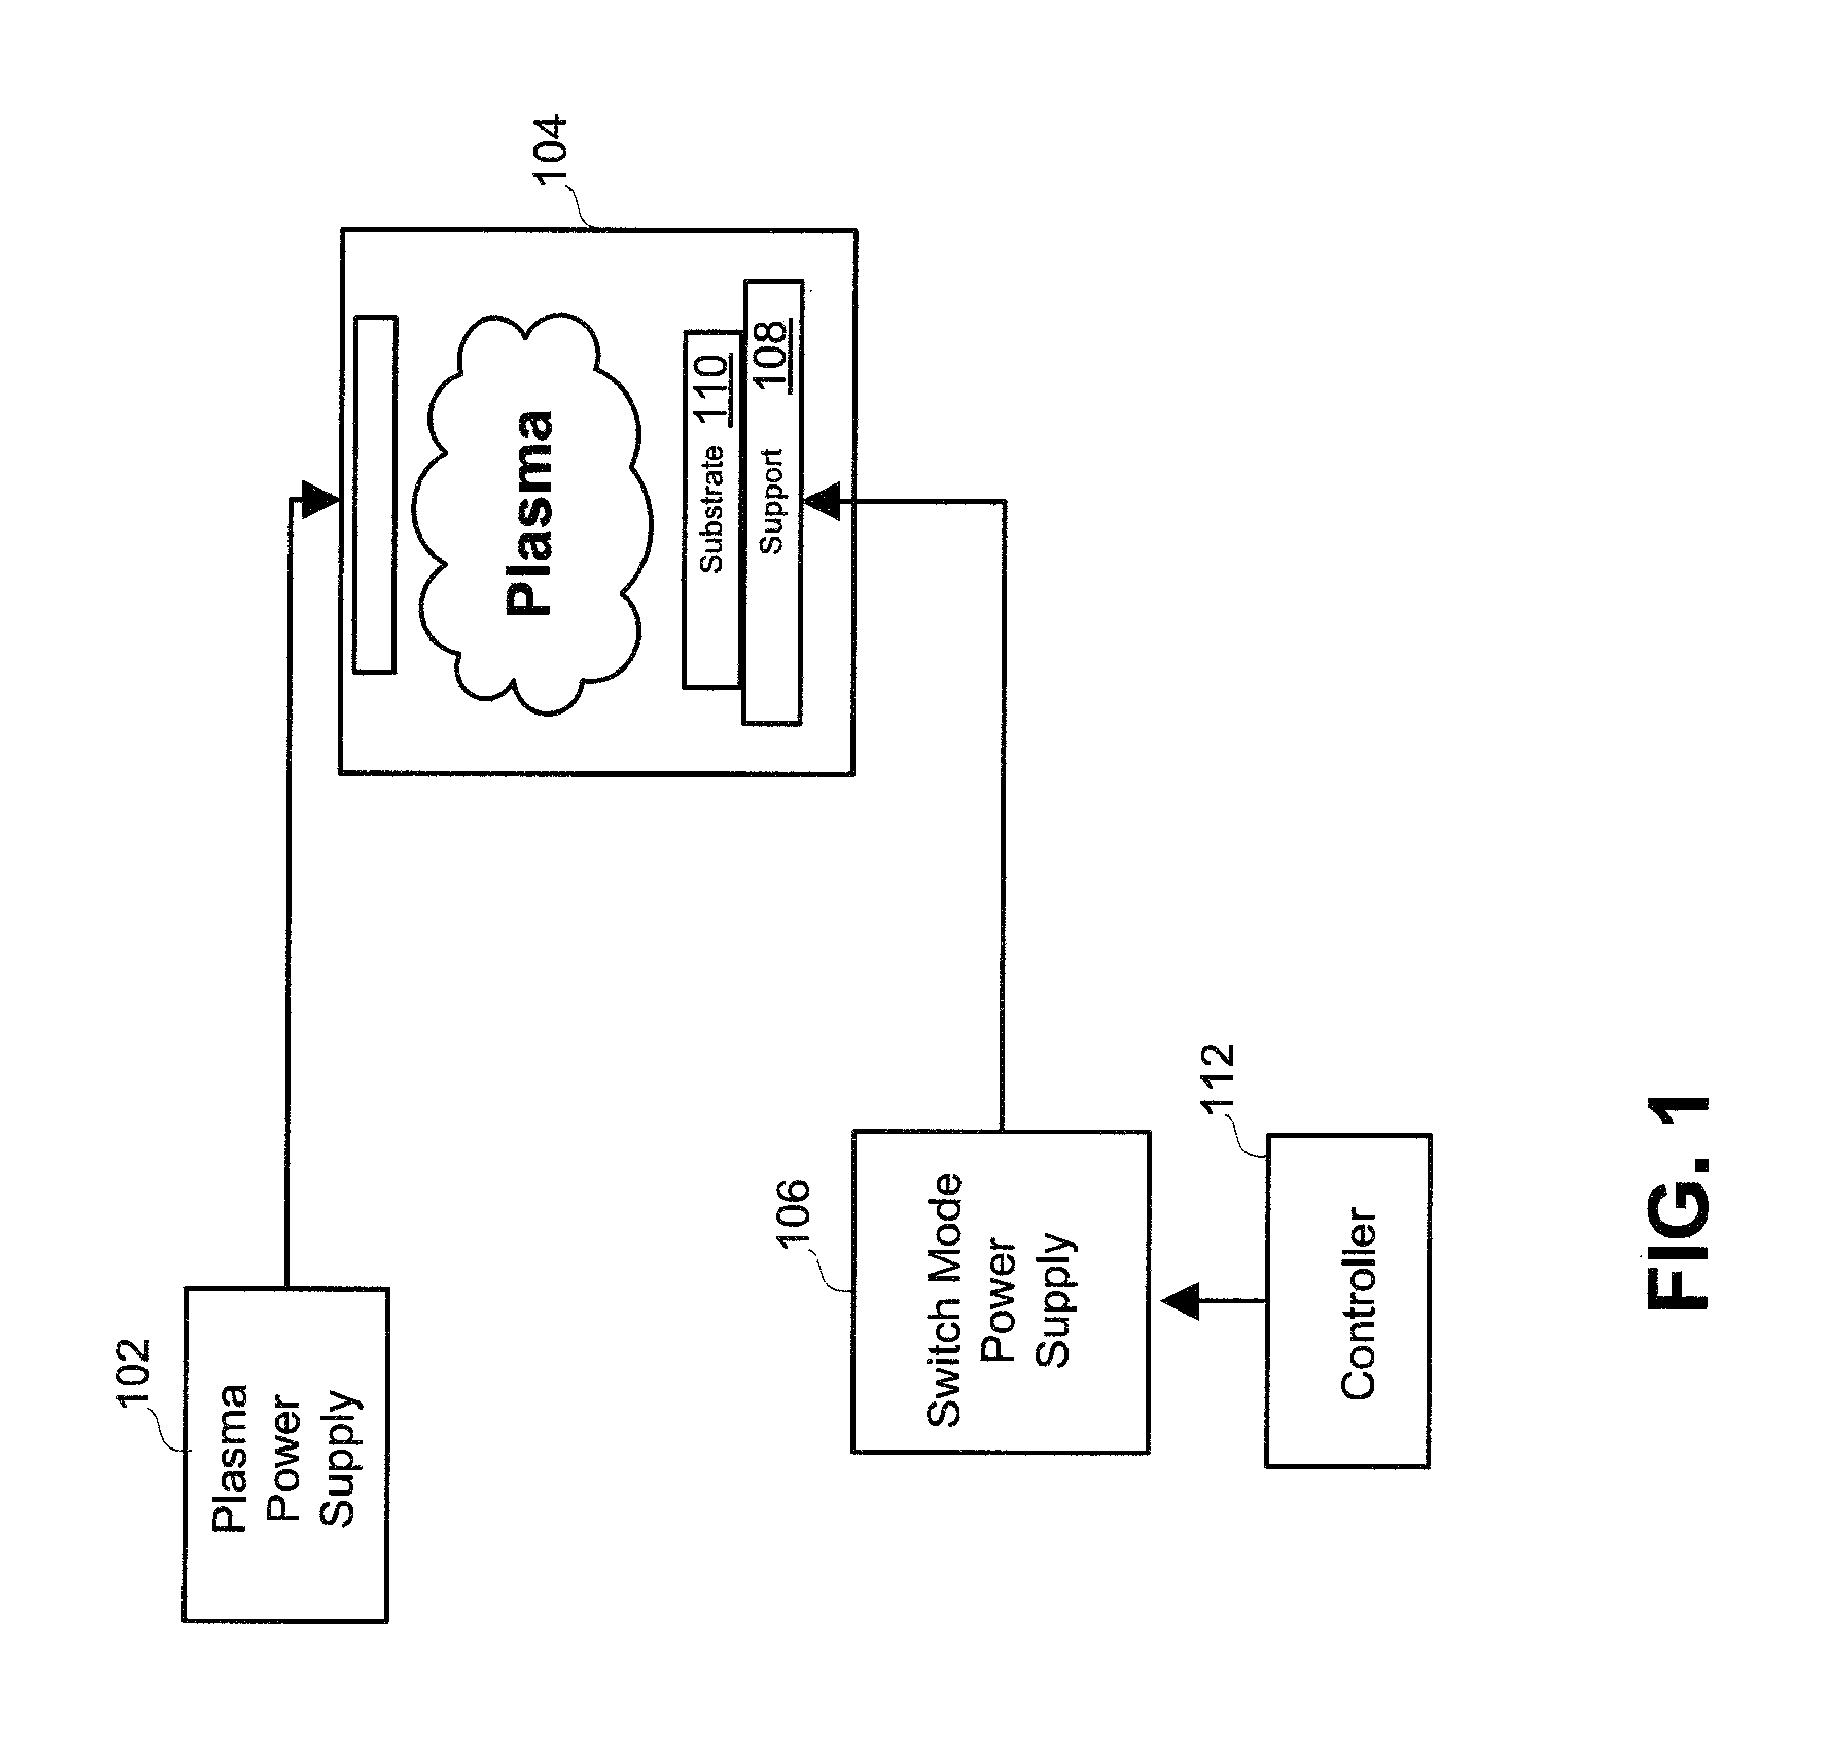 Wafer chucking system for advanced plasma ion energy processing systems